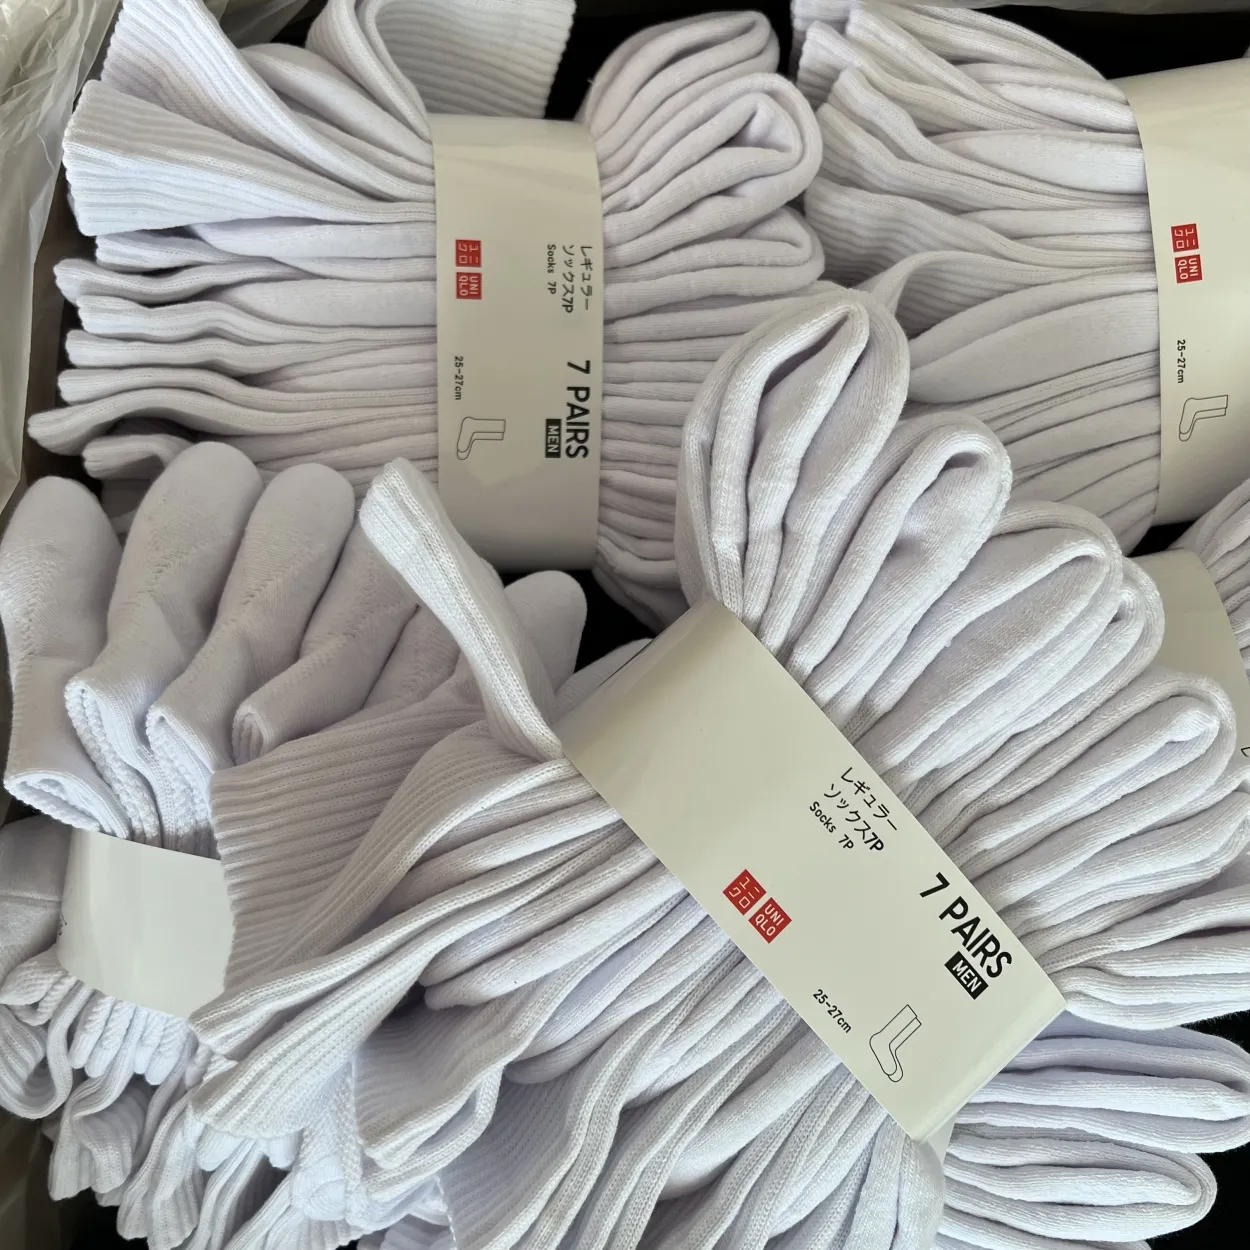 UNIQLO on Twitter Get a FREE pair of our bestselling Color Socks  take  advantage of special prices on allstar essentials for men women and kids  with new deals that start NOW